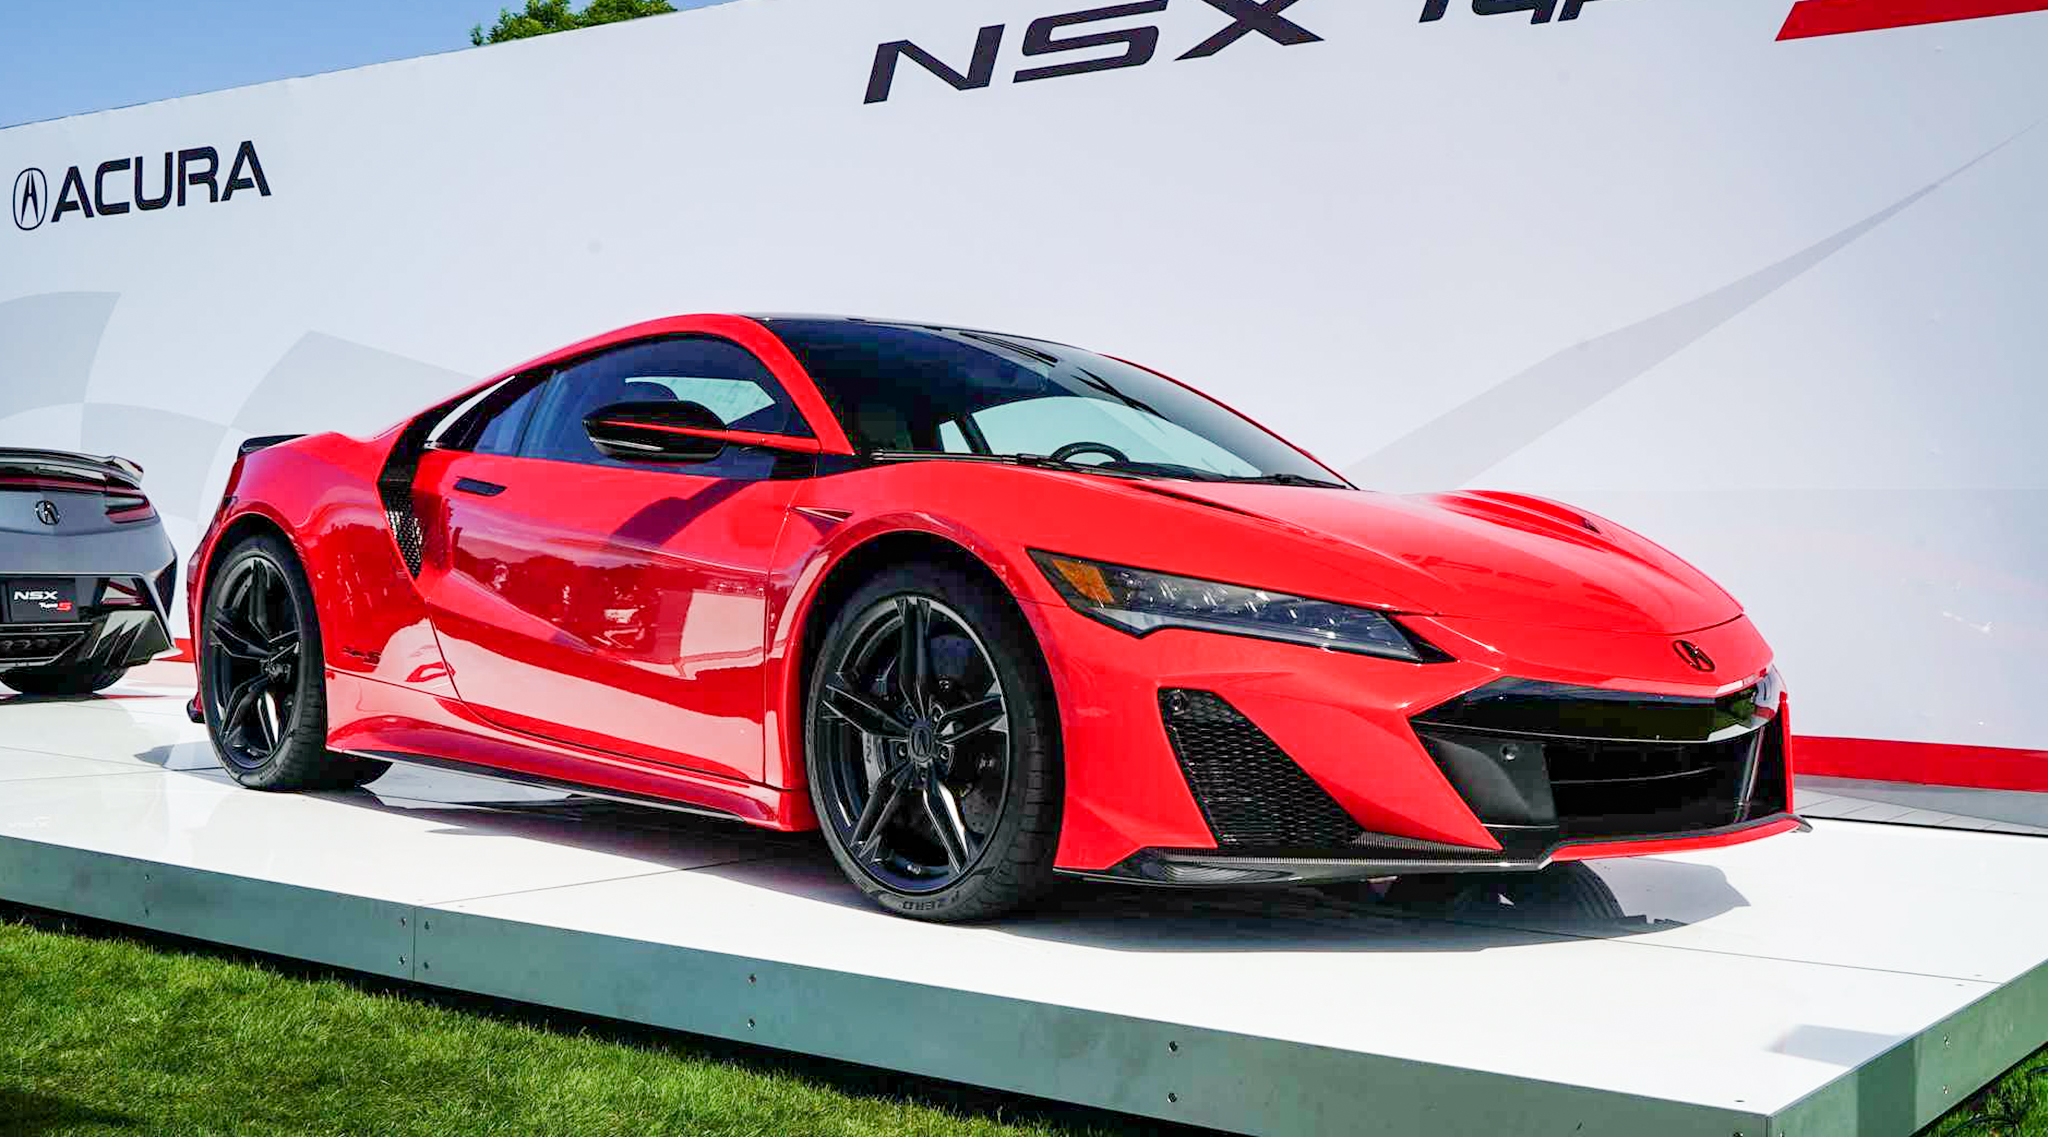 bao to honor their friendship drake made jordan b s dream come true by giving him a rare acura nsx supercar for his birthday 652ea6f936959 To Honor Their Friendship, Drake Made Jordan B's Dream Come True By Giving Him A Rare Acura Nsx Supercar For His Birthday.